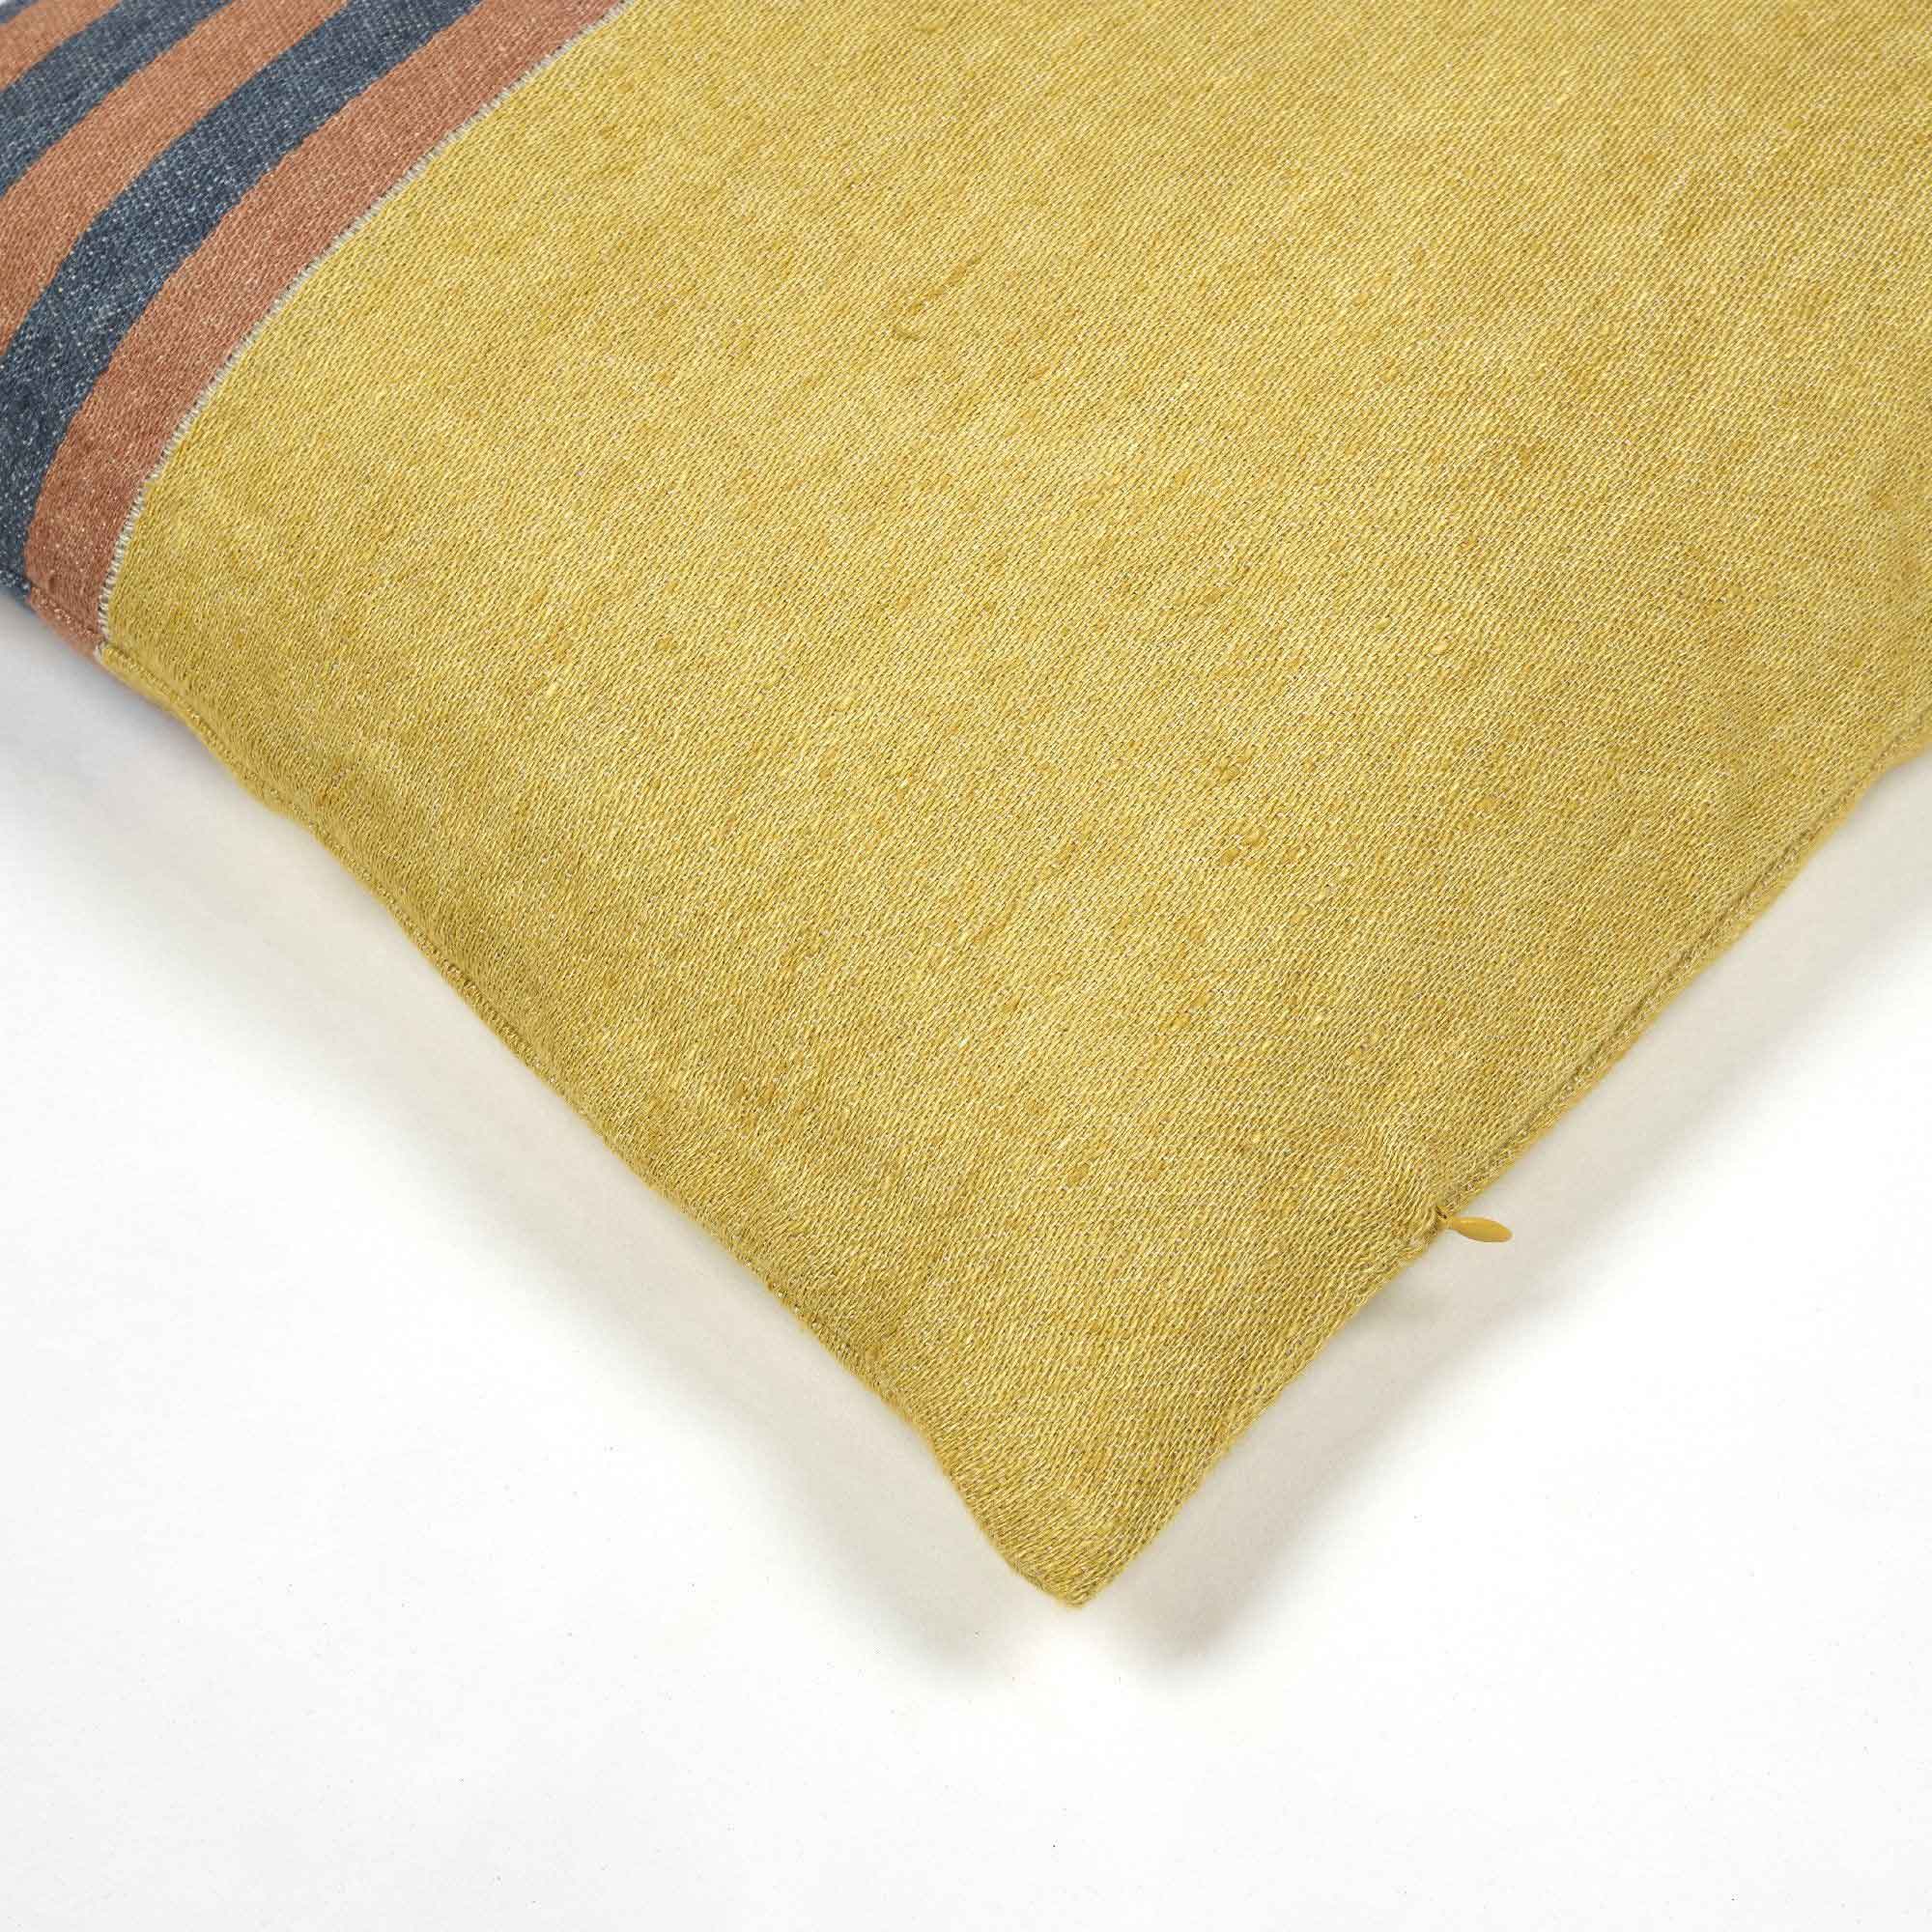 Belgian linen throw pillow cover corner detail shot in color Red Earth by Libeco for South Hous.